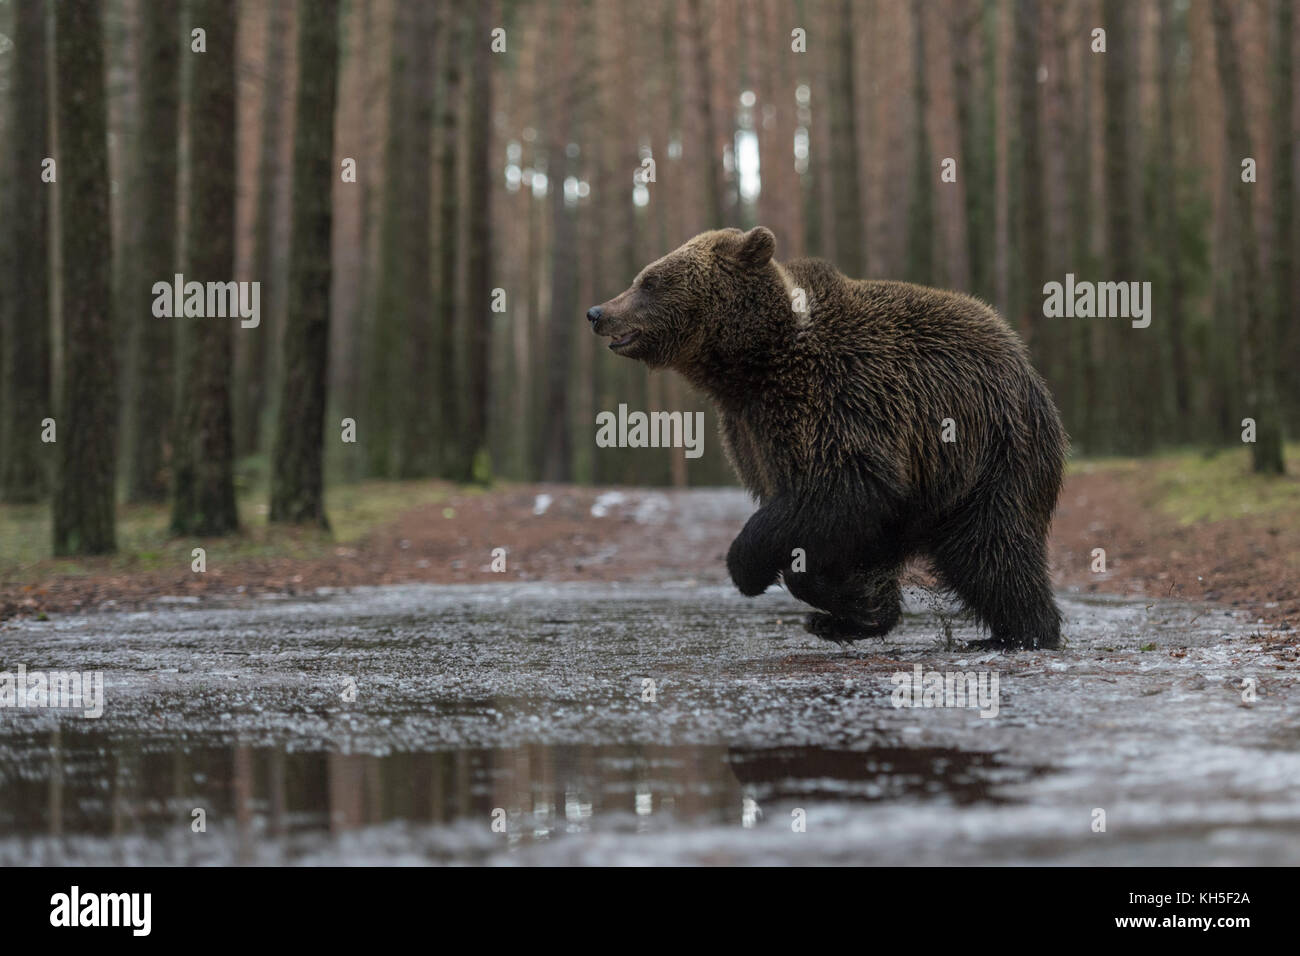 Brown Bear ( Ursus arctos ), young adolescent, running fast through, jumping over a frozen puddle, crossing a forest road, in winter, Europe. Stock Photo